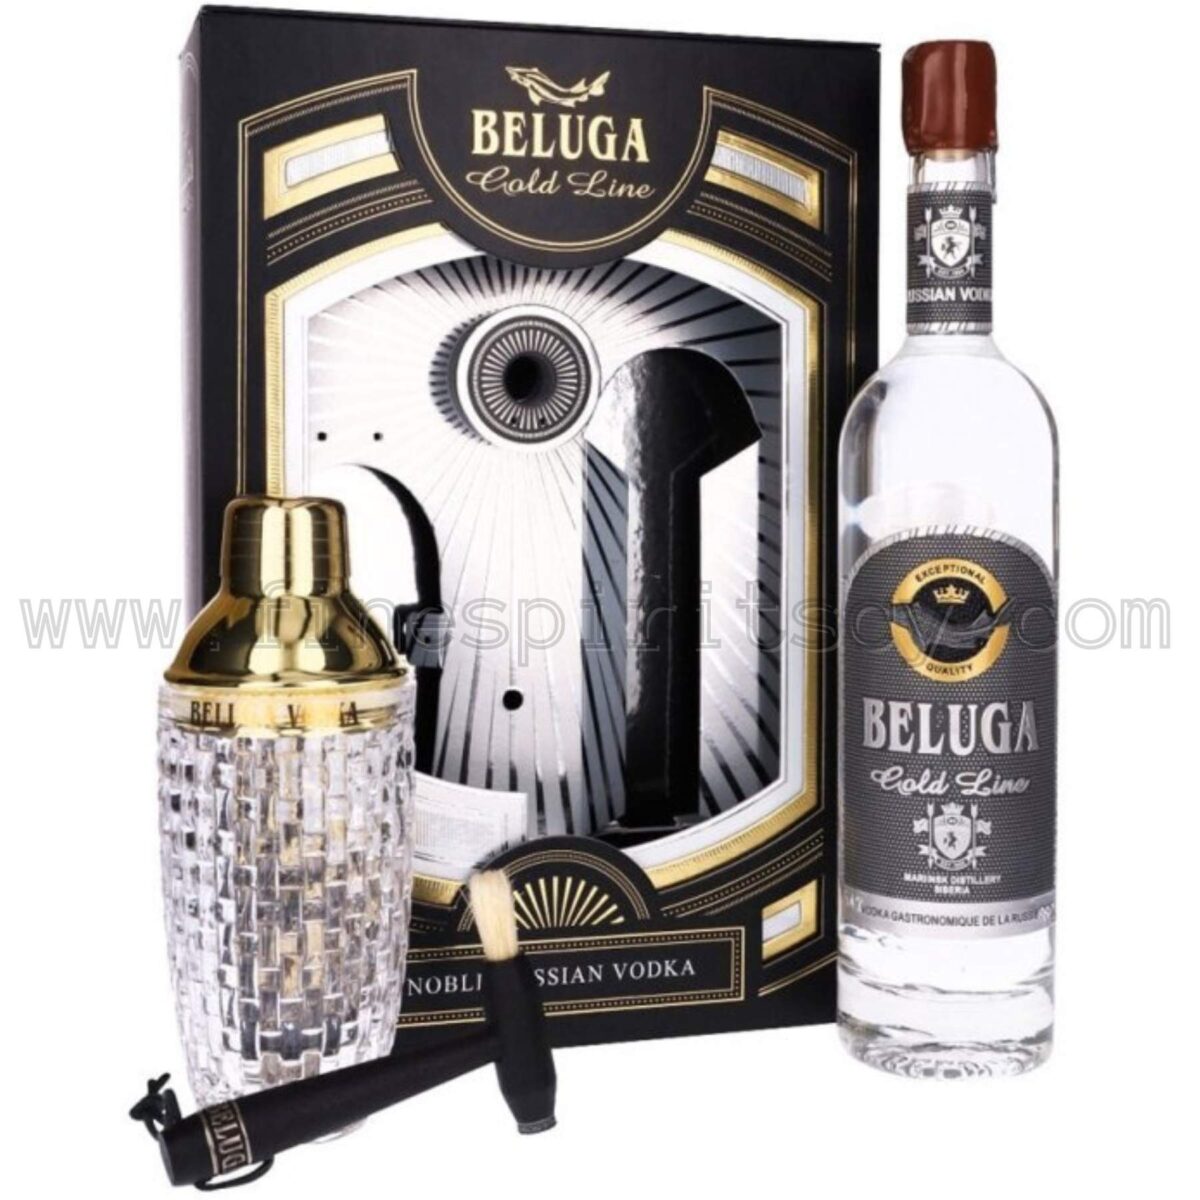 Beluga Gold Line Shaker Cocktail Cyprus CY Russian Vodka Gift Pack Set Idea